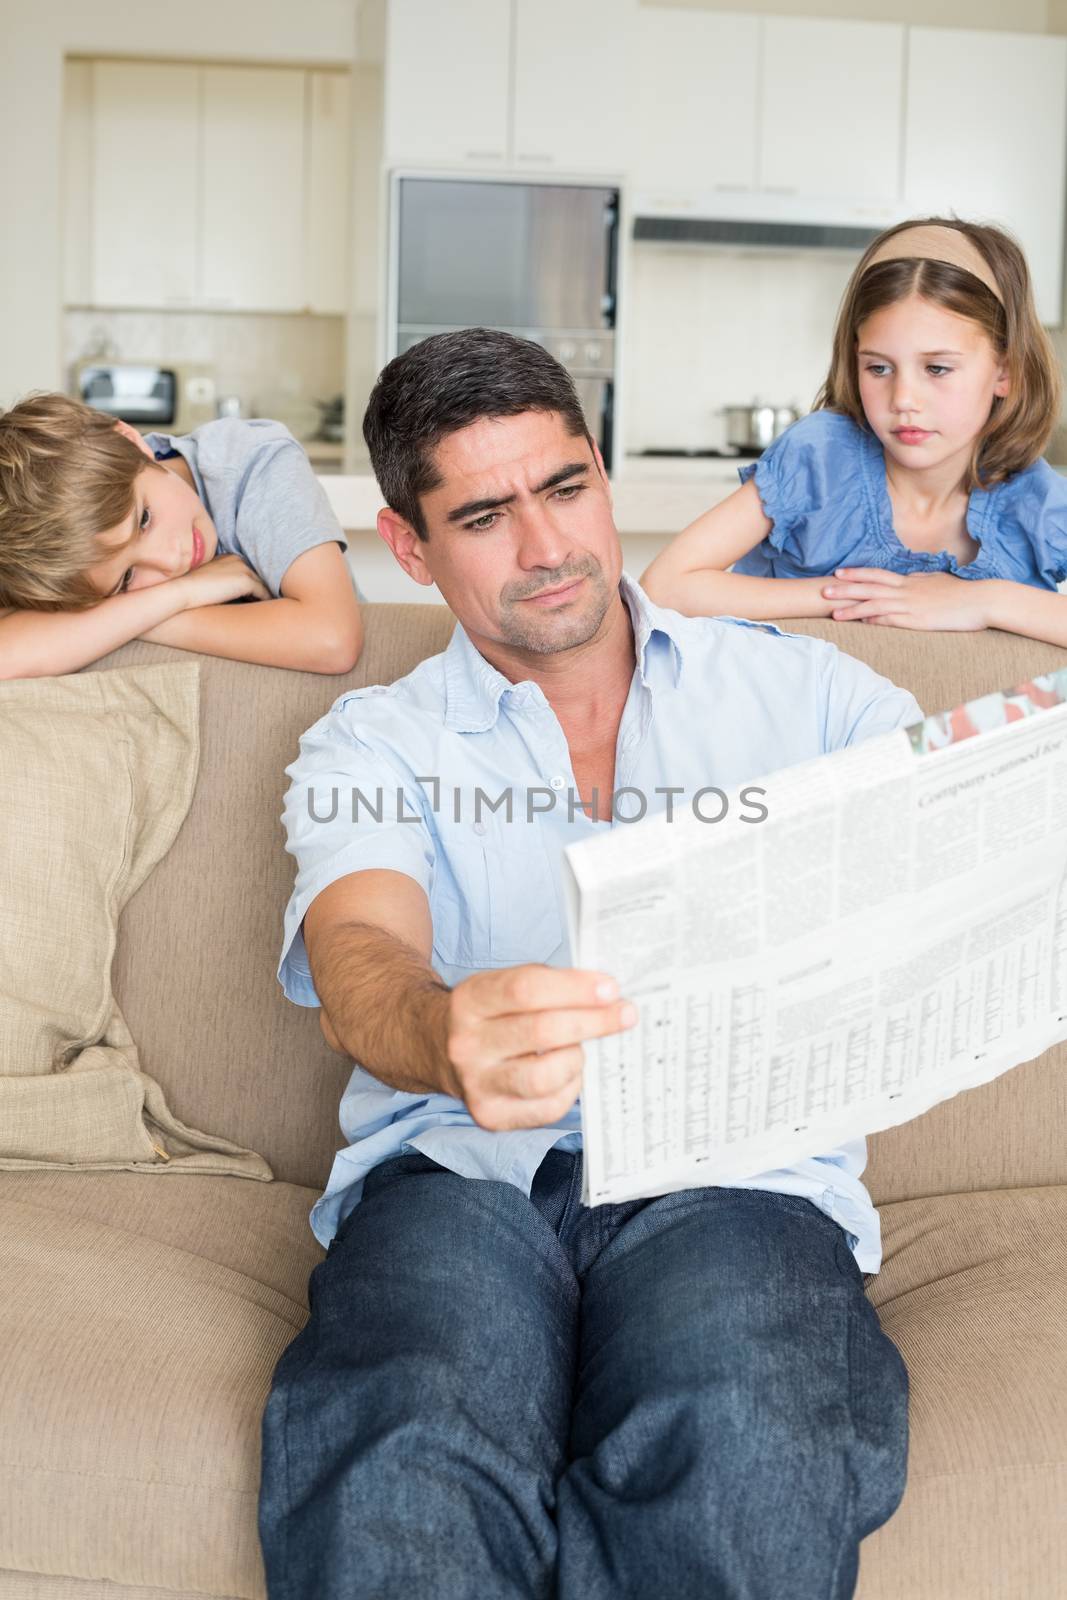 Bored children looking at father reading newspaper by Wavebreakmedia